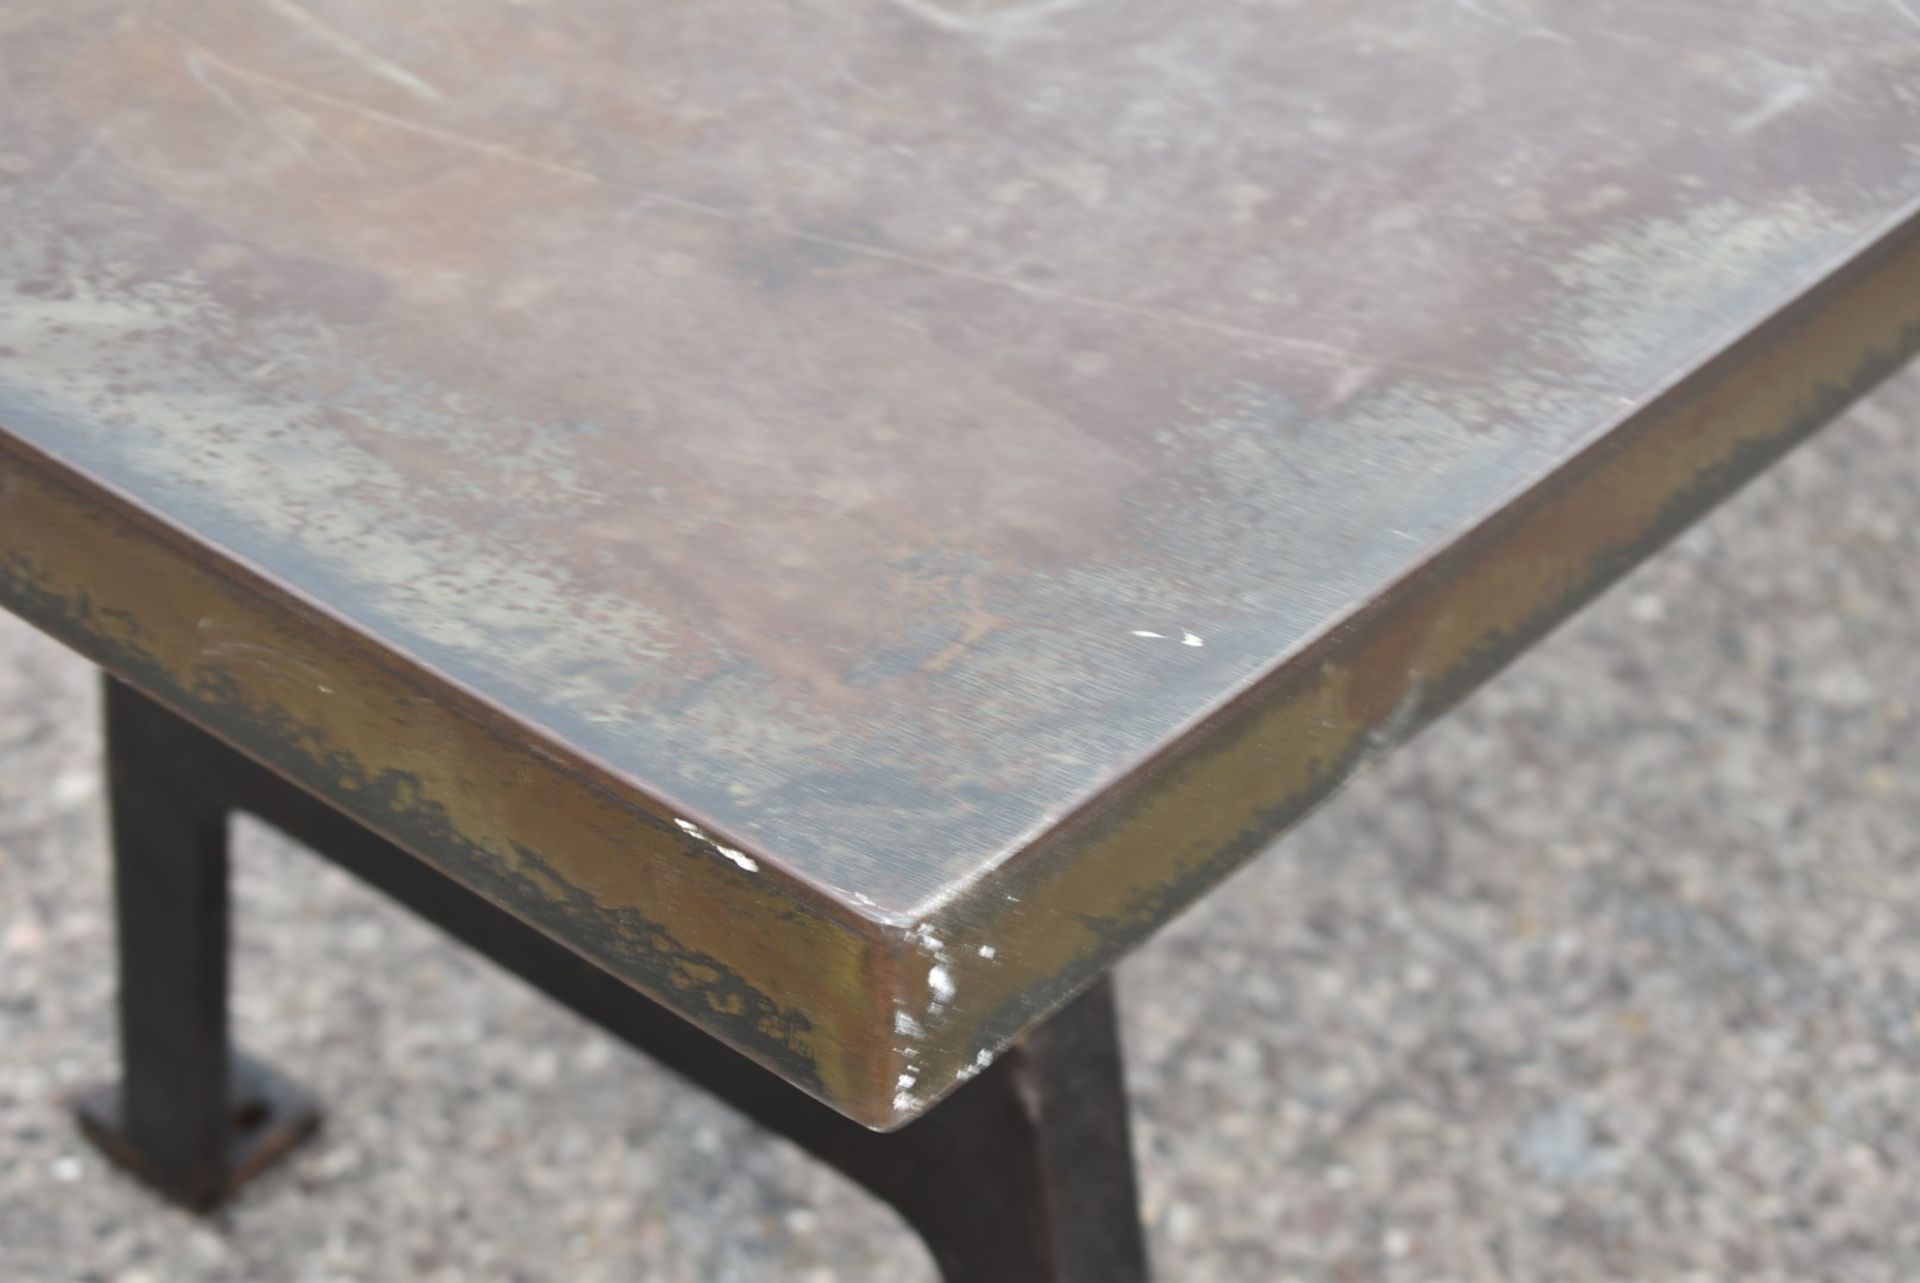 1 x Industrial Style 200cm Banquetting Restaurant Table Featuring a Heavy Steel Top & Steel Legs - Image 19 of 23